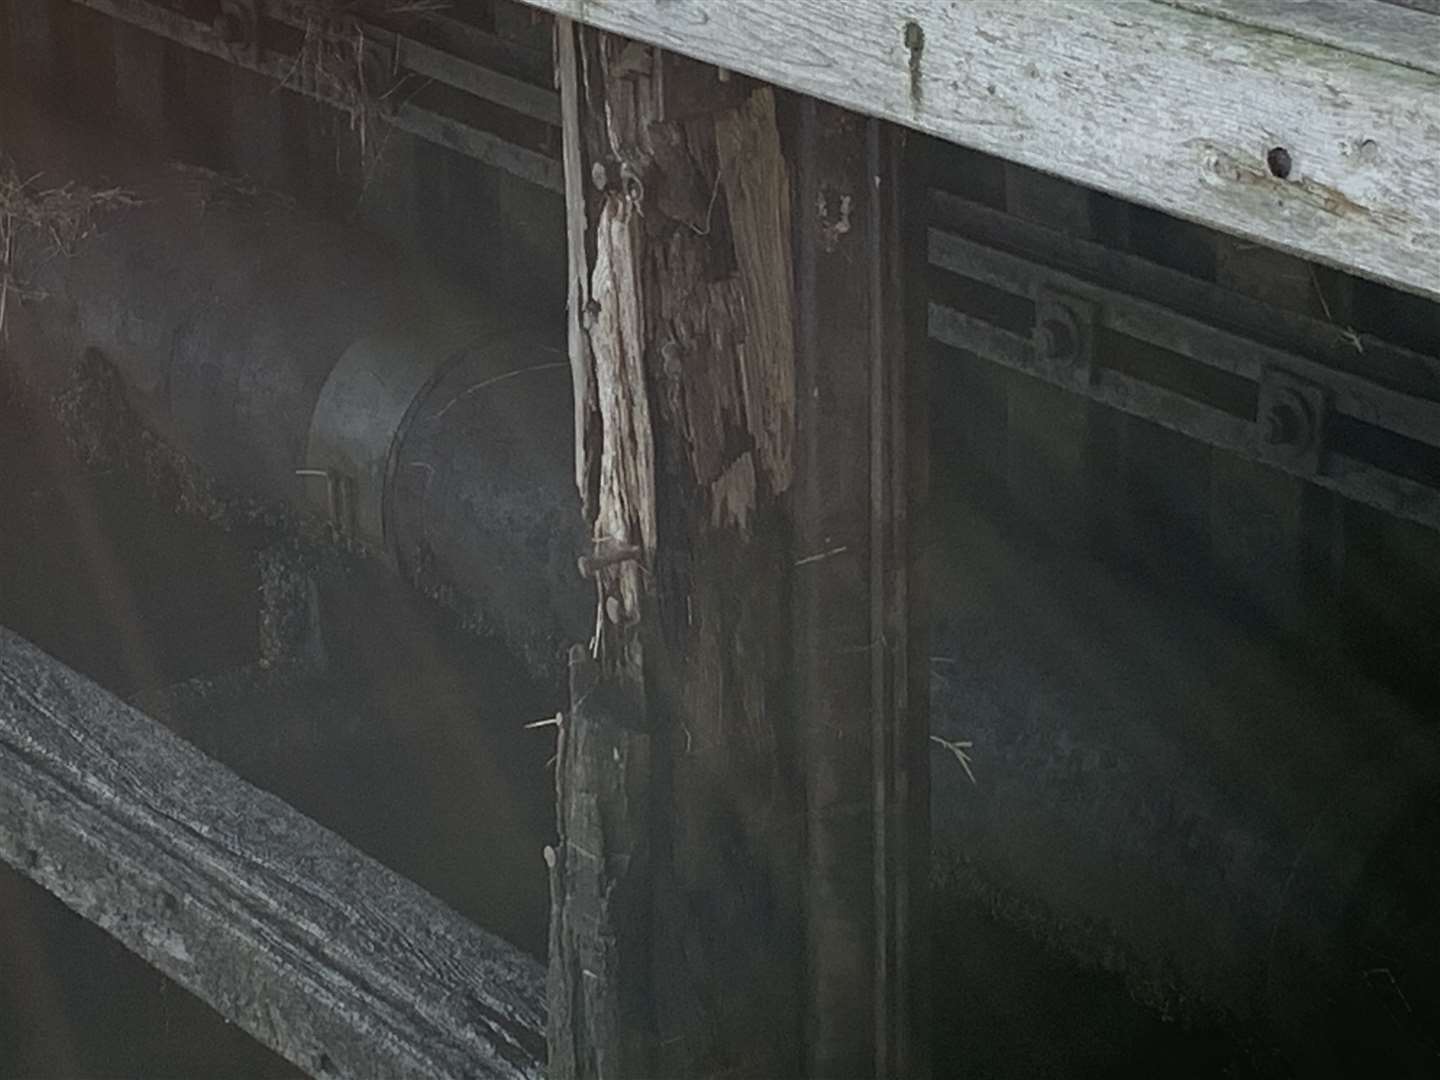 A close-up showing the deteriorating state of wooden fenders at Thurso harbour.